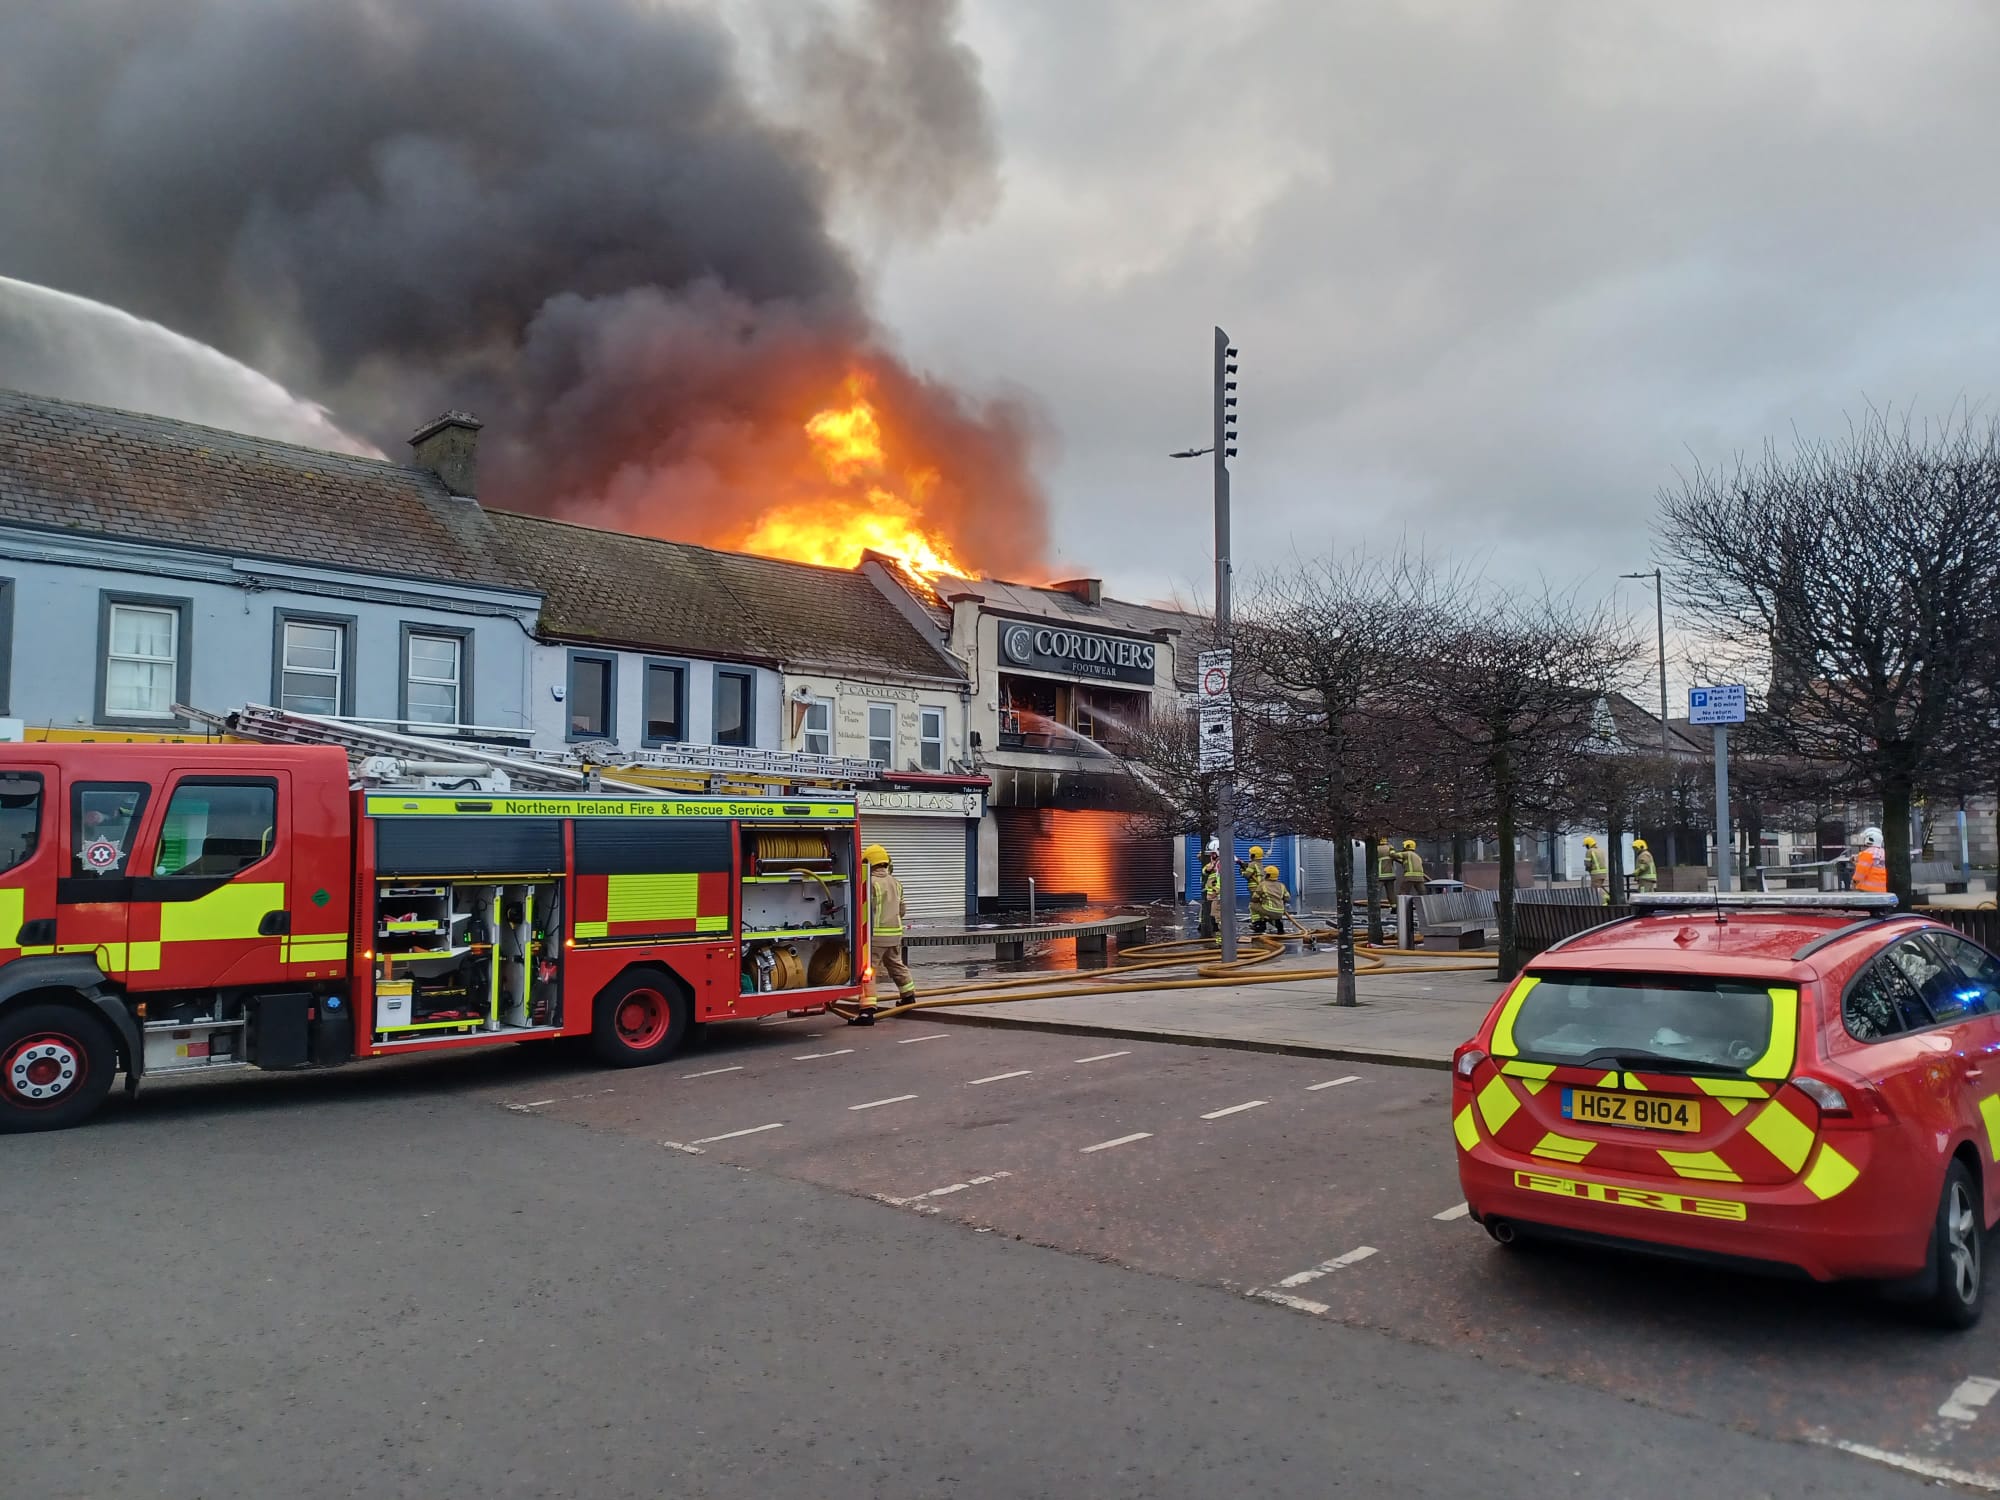 This is an image of a Fire Appliance at the scene of a Fire in Conway Square in Newtownards